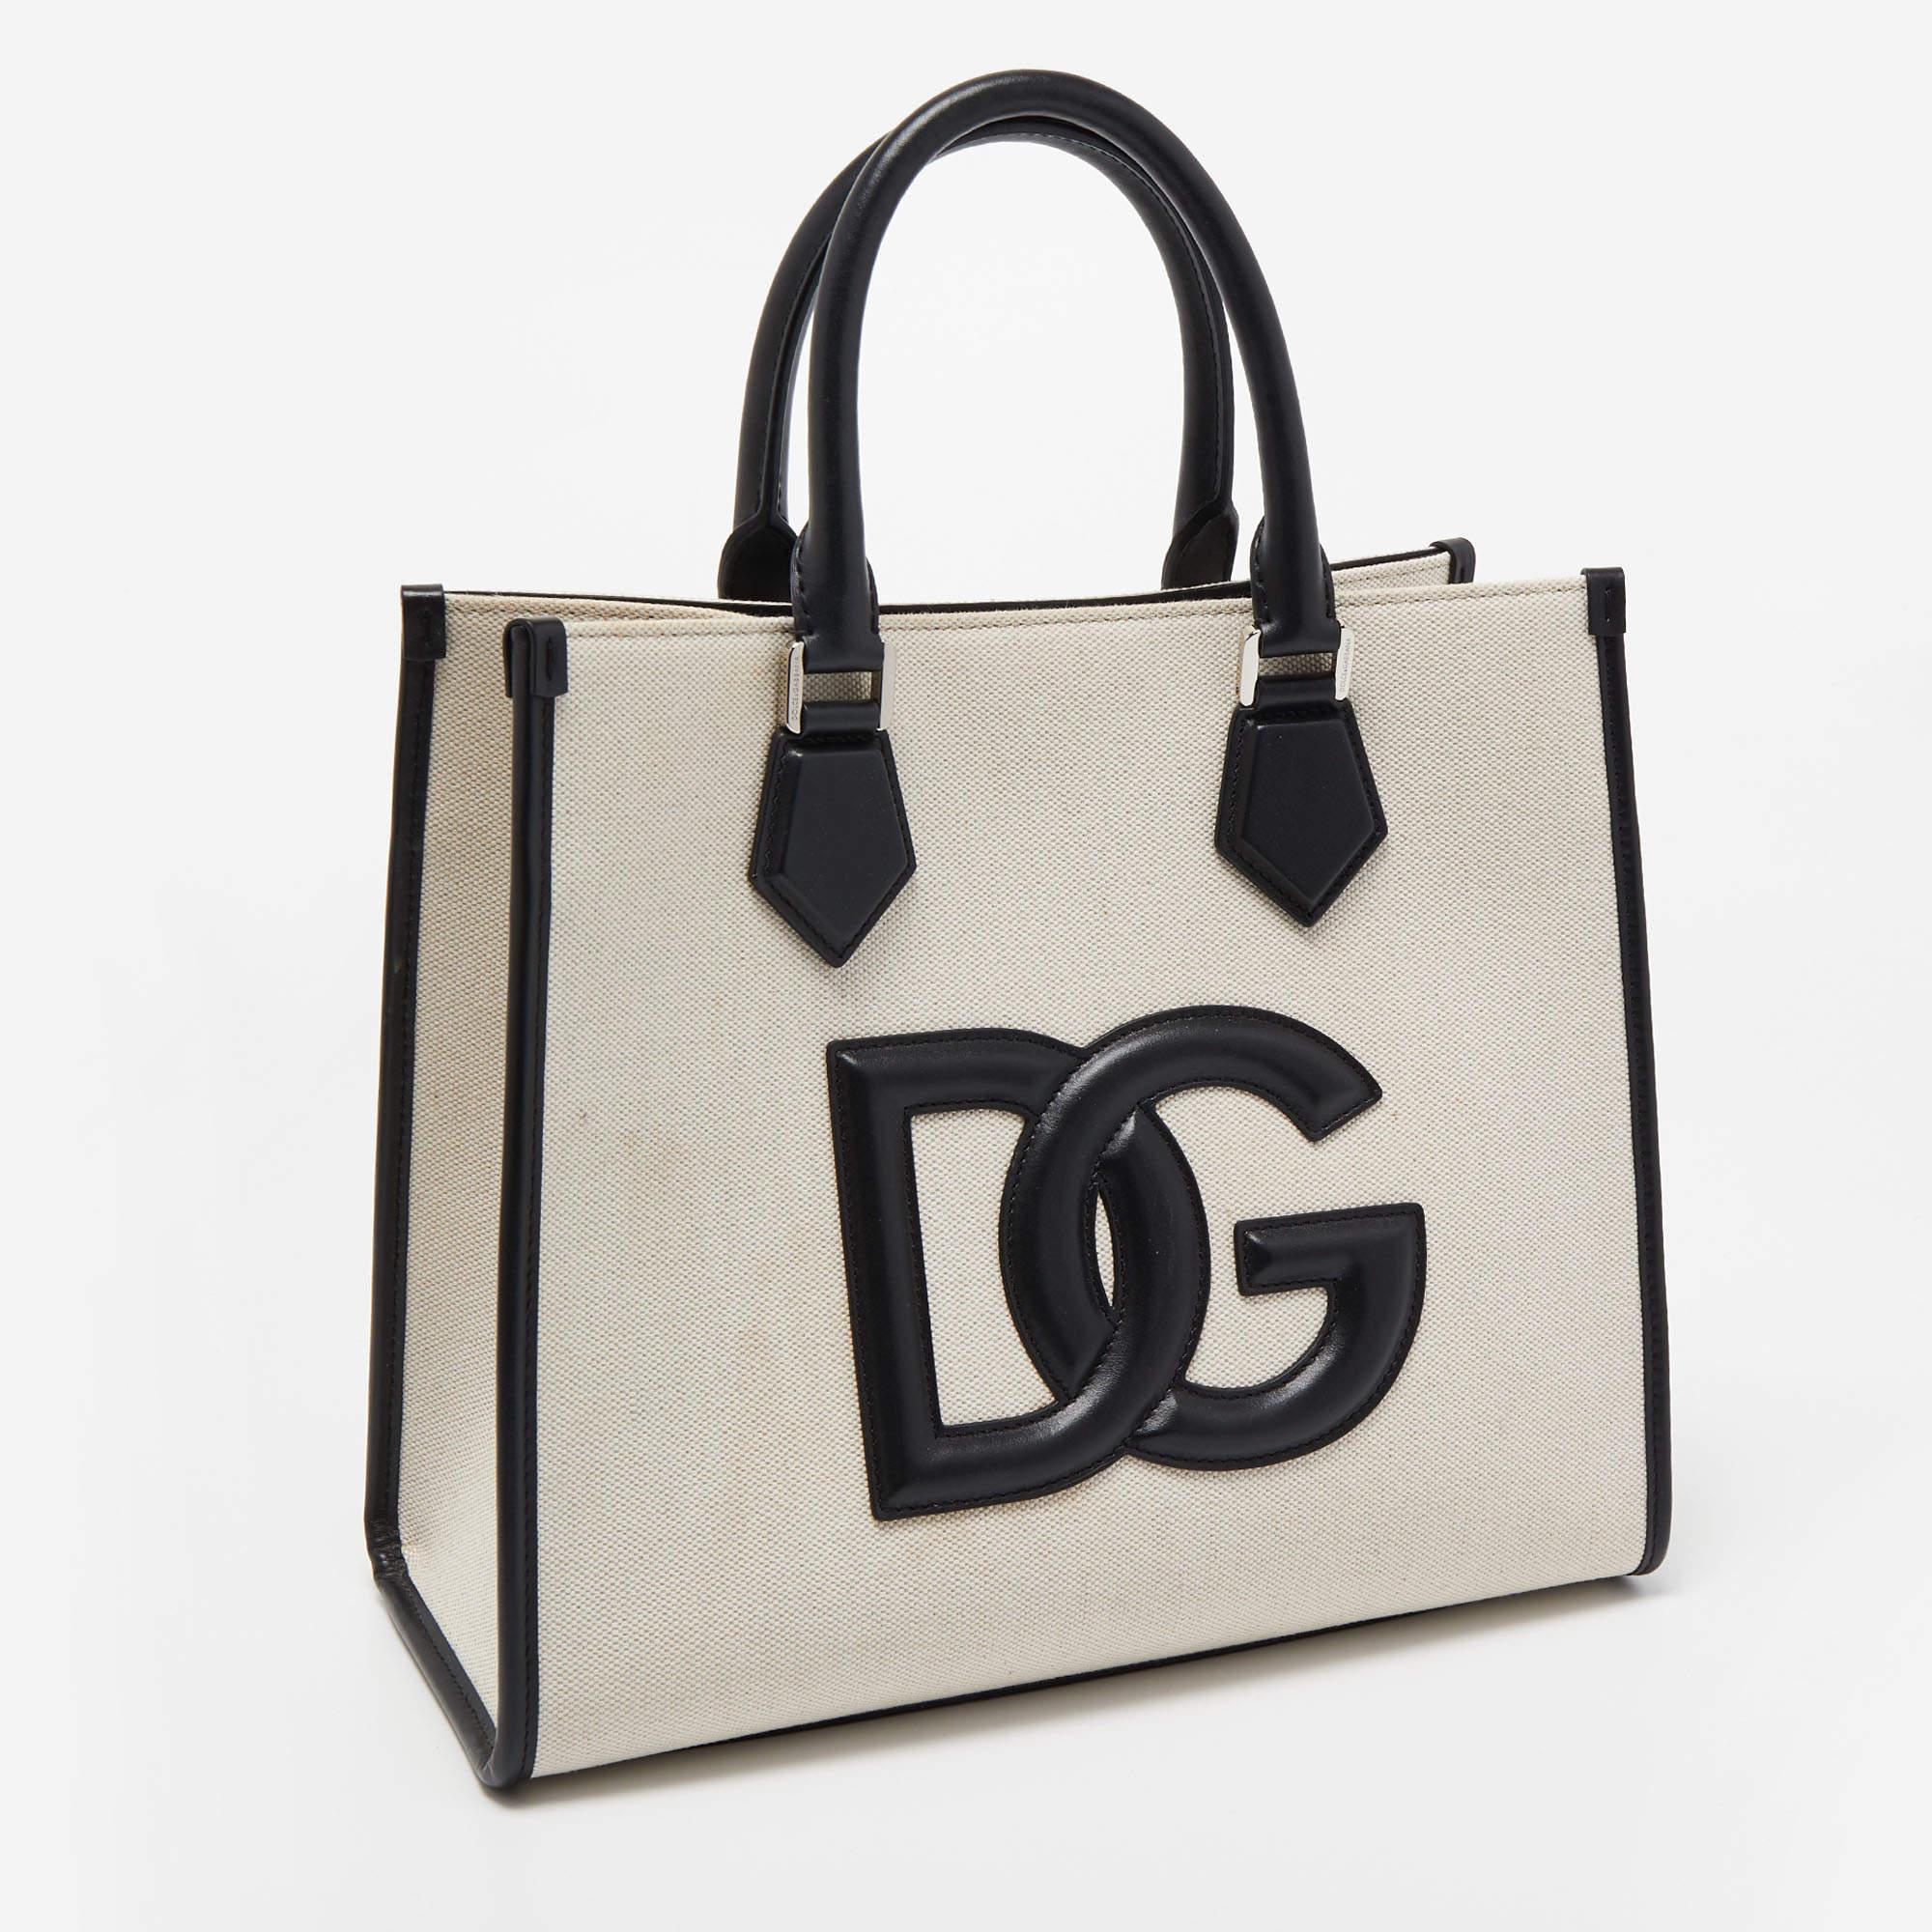 Do you know what would be the perfect bag to swing for your daily errands or sprees? This one here from Dolce & Gabbana. It is perfect! Crafted from off-white and black leather, the bag has a lovely shape, two leather handles, and a spacious